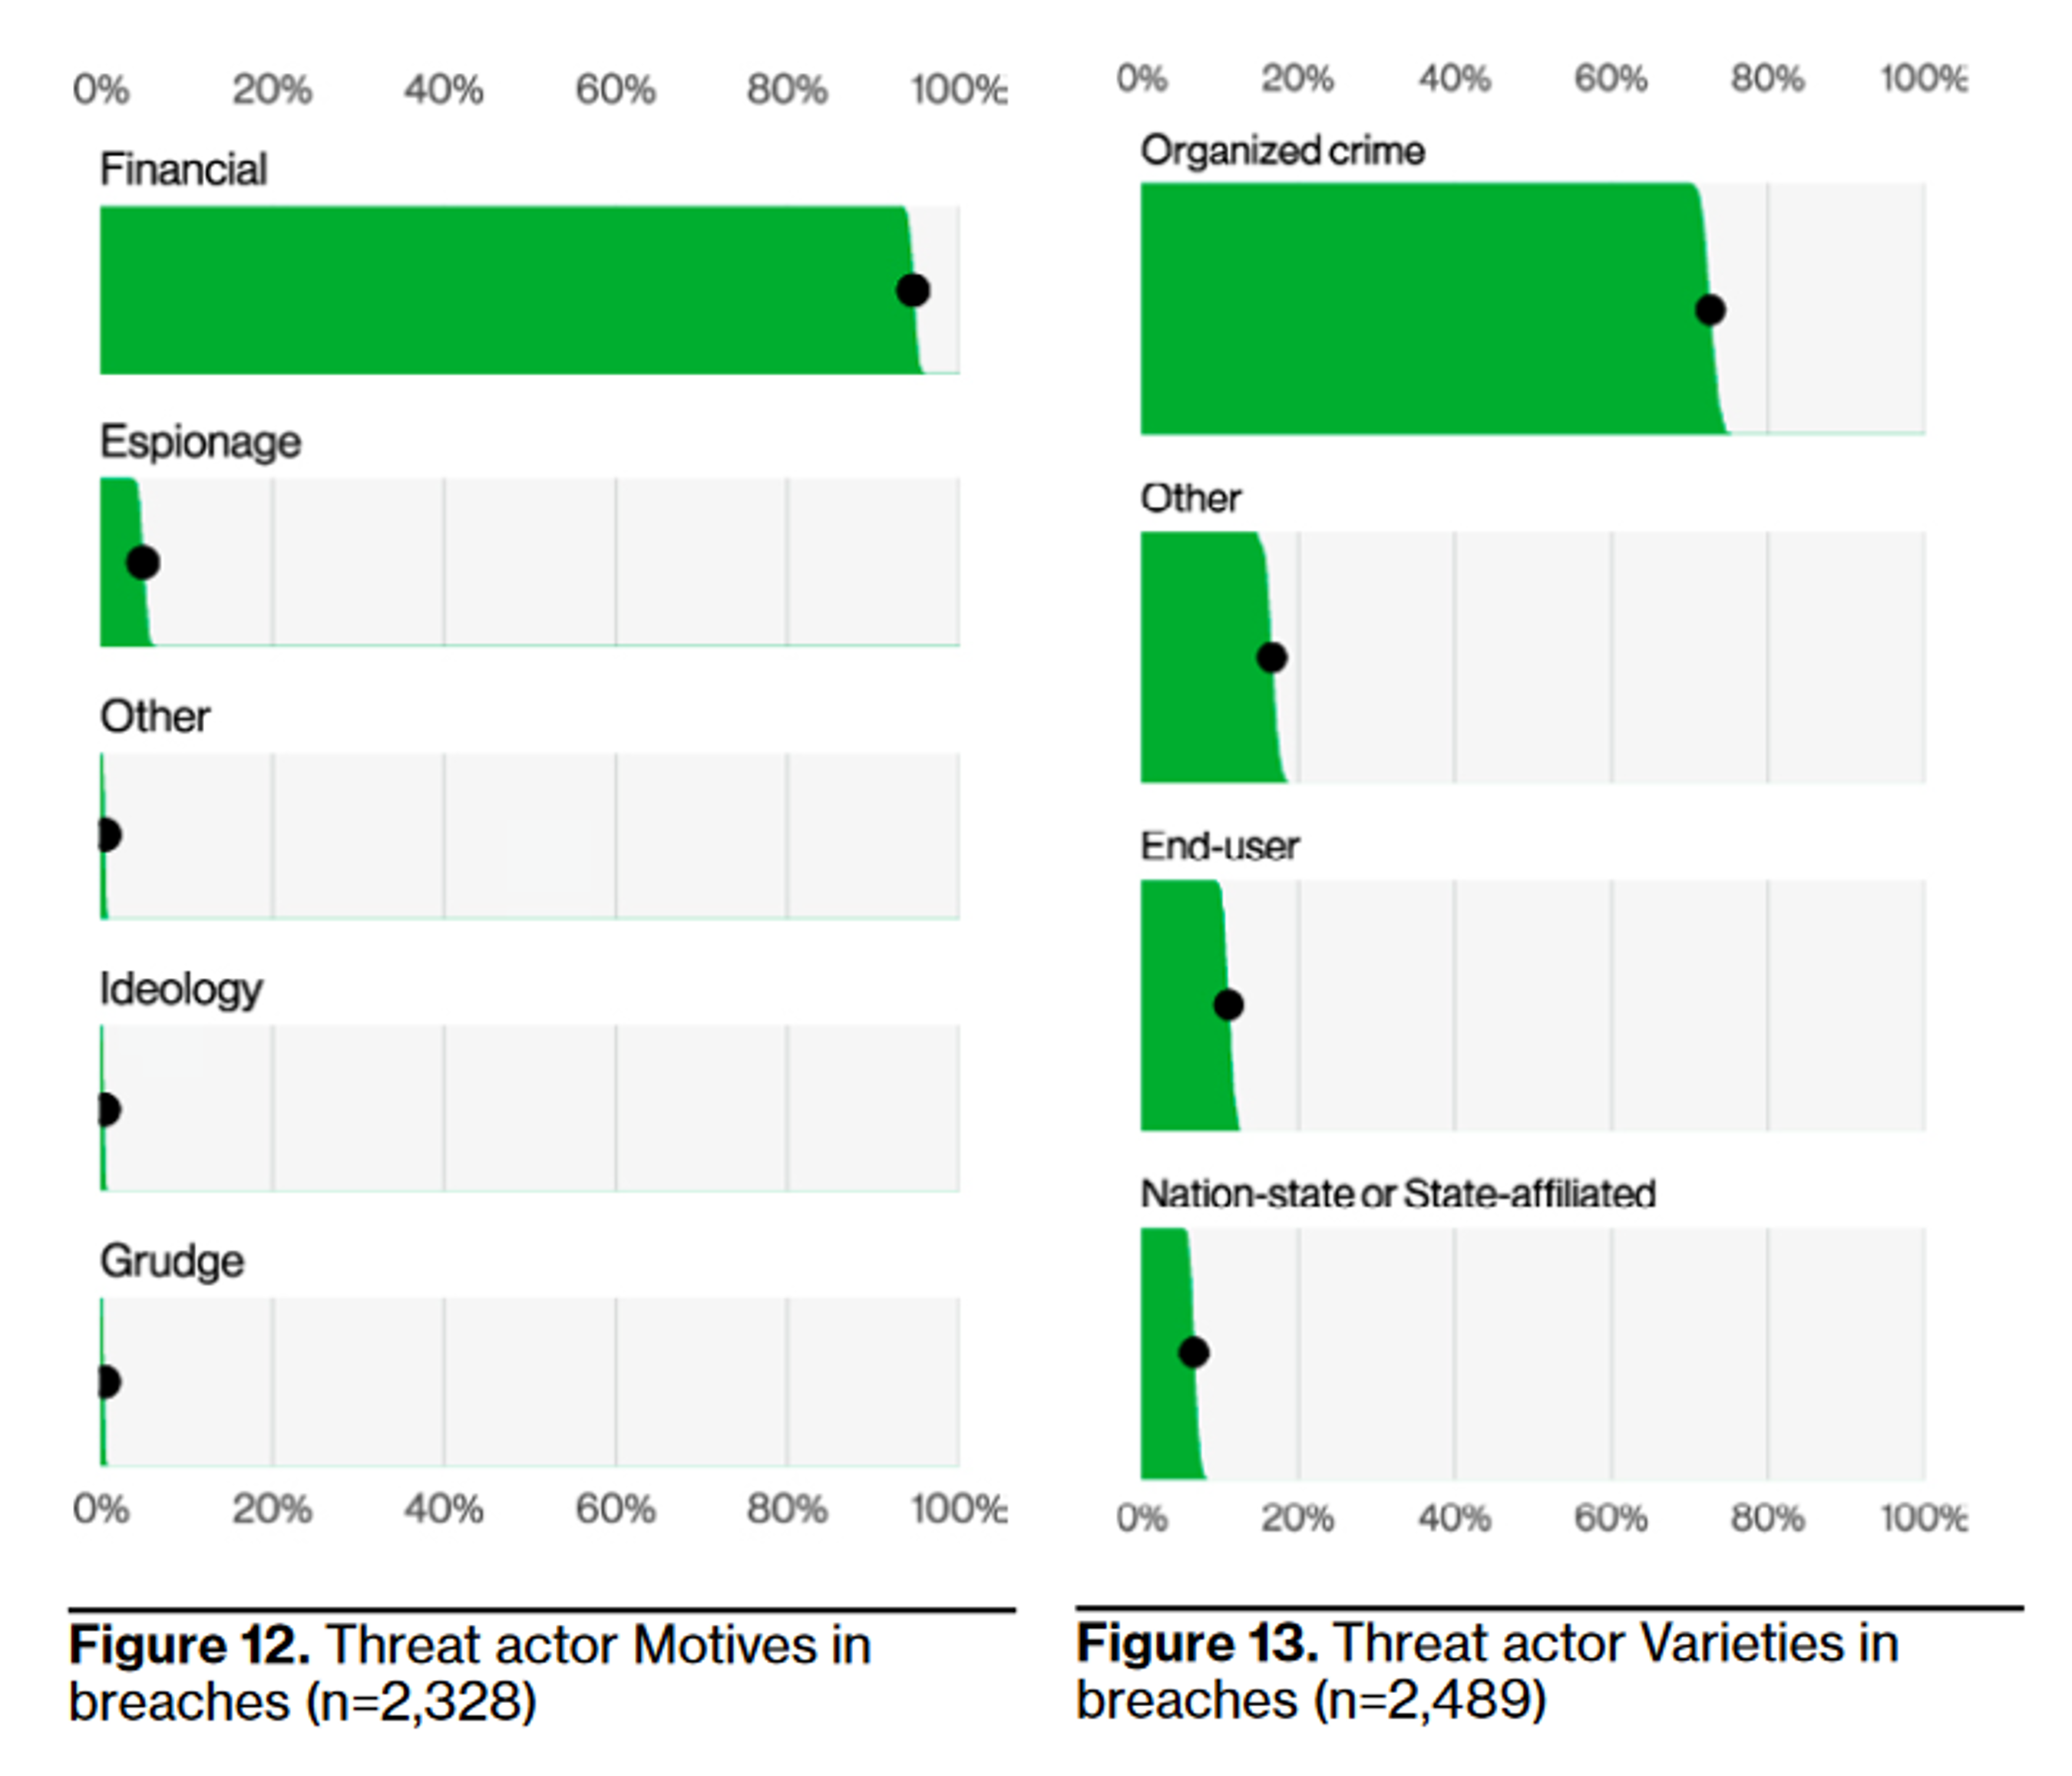 A screenshot from the Verizon Data Breach Investigations Report. It displays threat actor motives in breaches (n = 2,328) and threat actor varieties in breaches (n = 2,489). As stated in the surrounding text, the financial motive dominates the chart with 95% of breaches. The organized crime motivate dominates in the second chart, reflecting 75% of all threat actors in breaches.